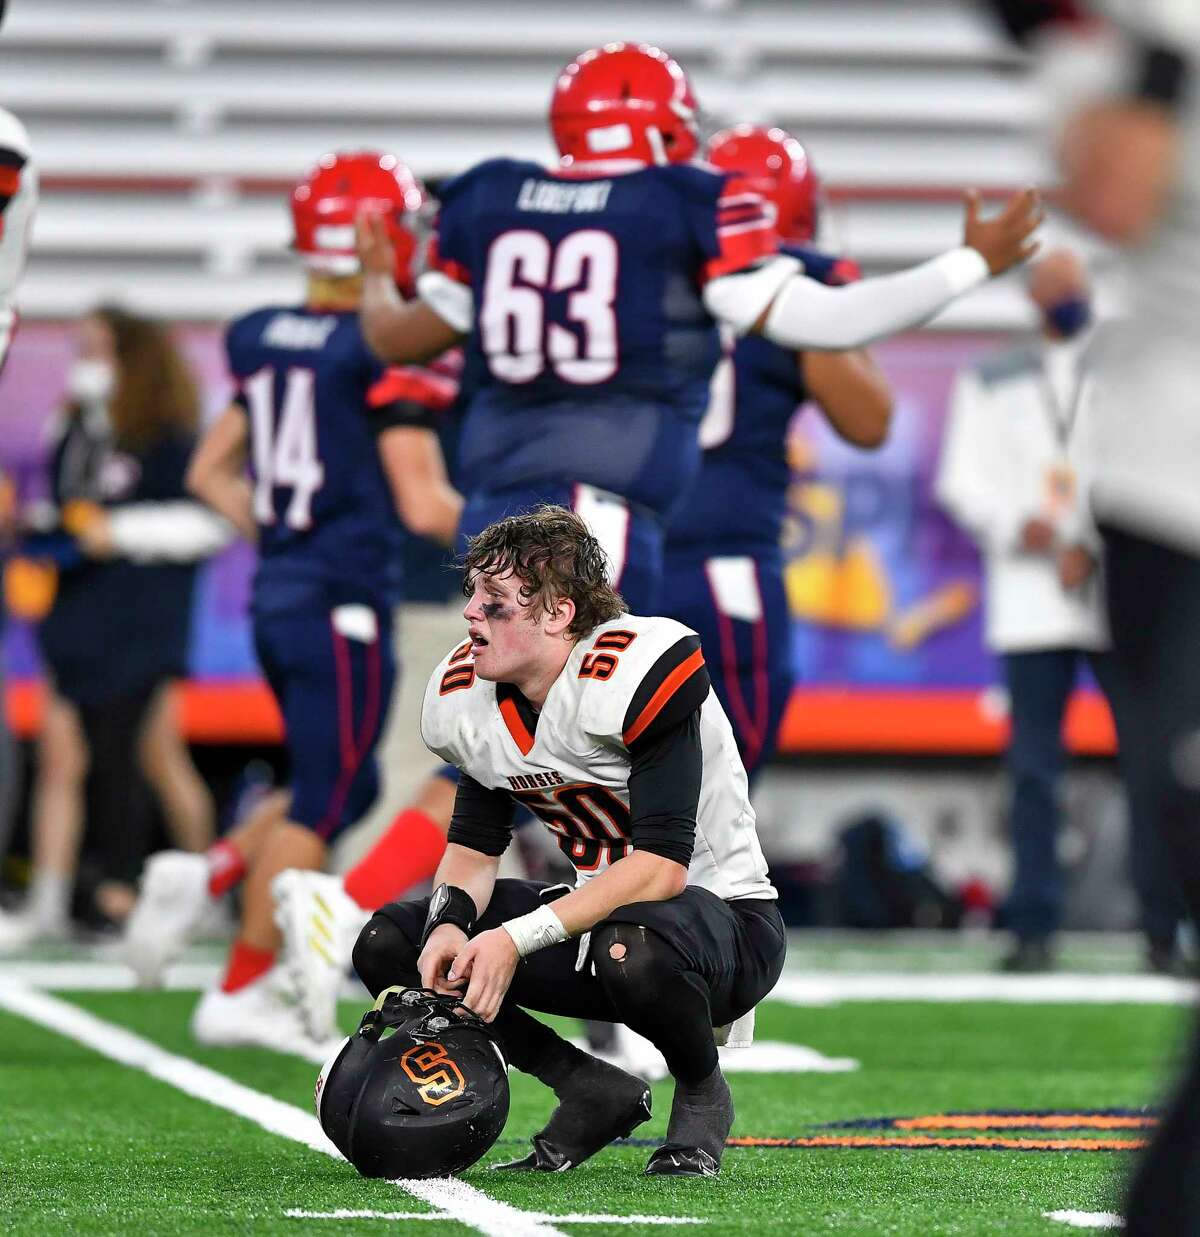 Schuylerville's Carson Patrick reacts at the final whistle of a loss against Chenango Forks in the NYSPHSAA Football Championships Class C final in Syracuse, N.Y., Friday, Dec. 3, 2021. Schuylerville lost to Chenango Forks 21-0. (Adrian Kraus / Special to the Times Union)